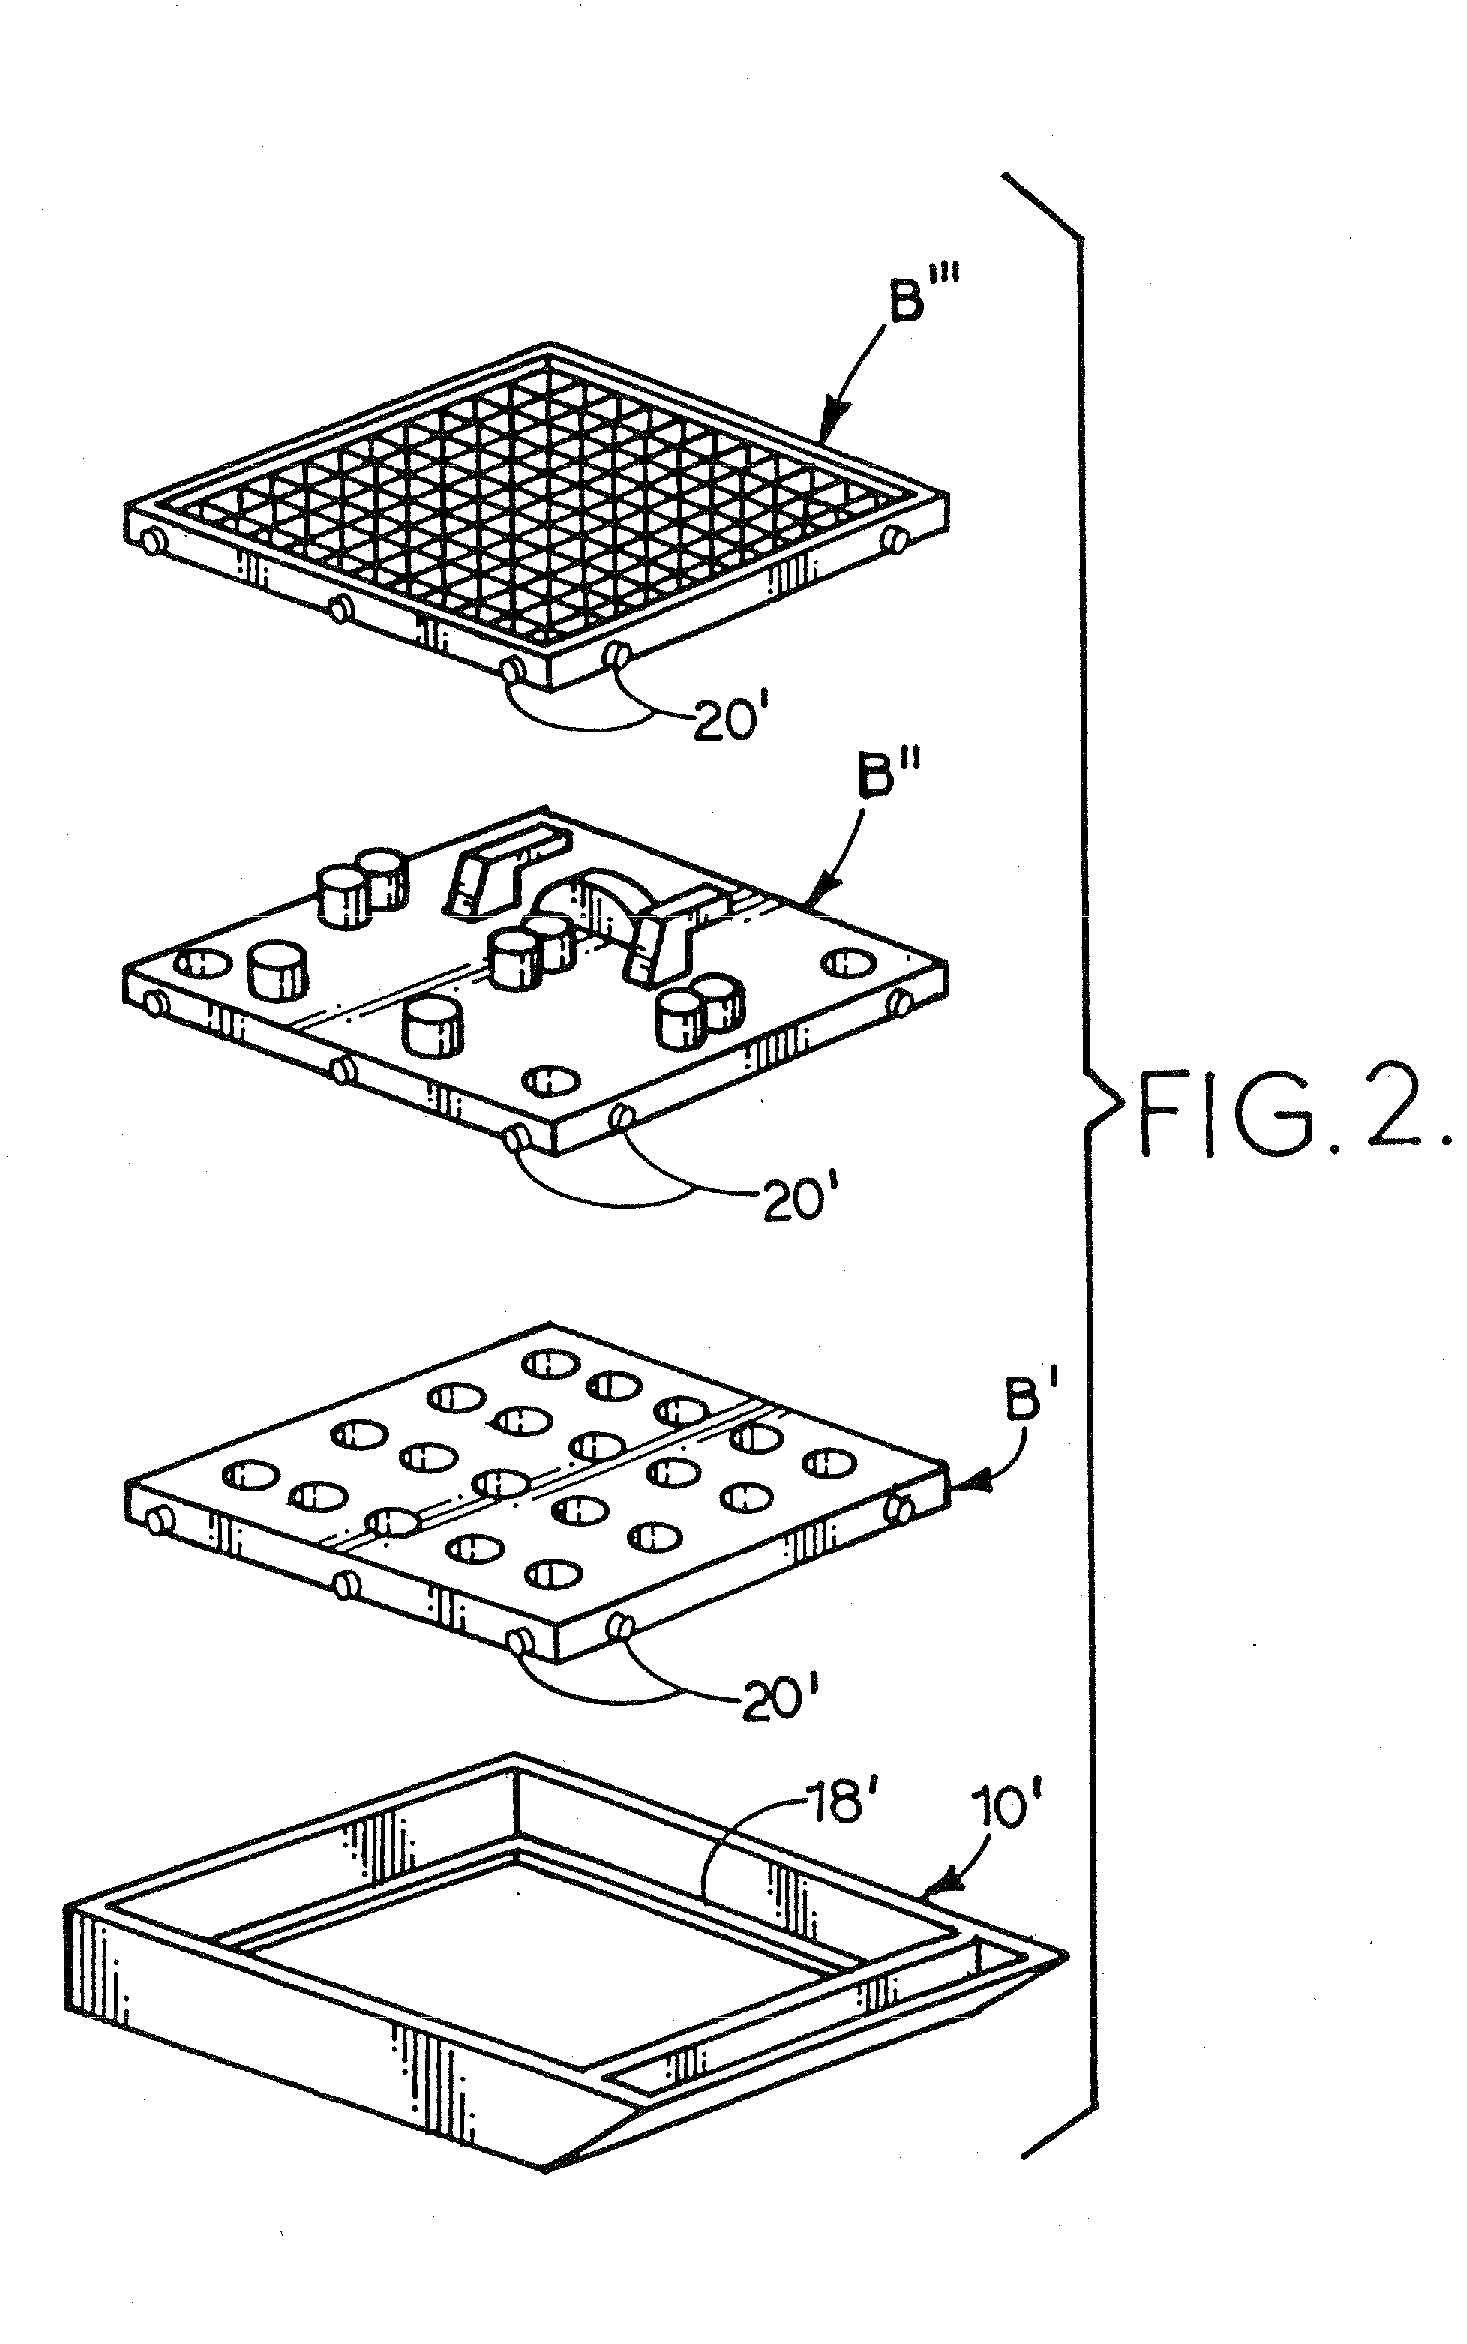 Apparatus and method for harvesting and handling tissue samples for biopsy analysis